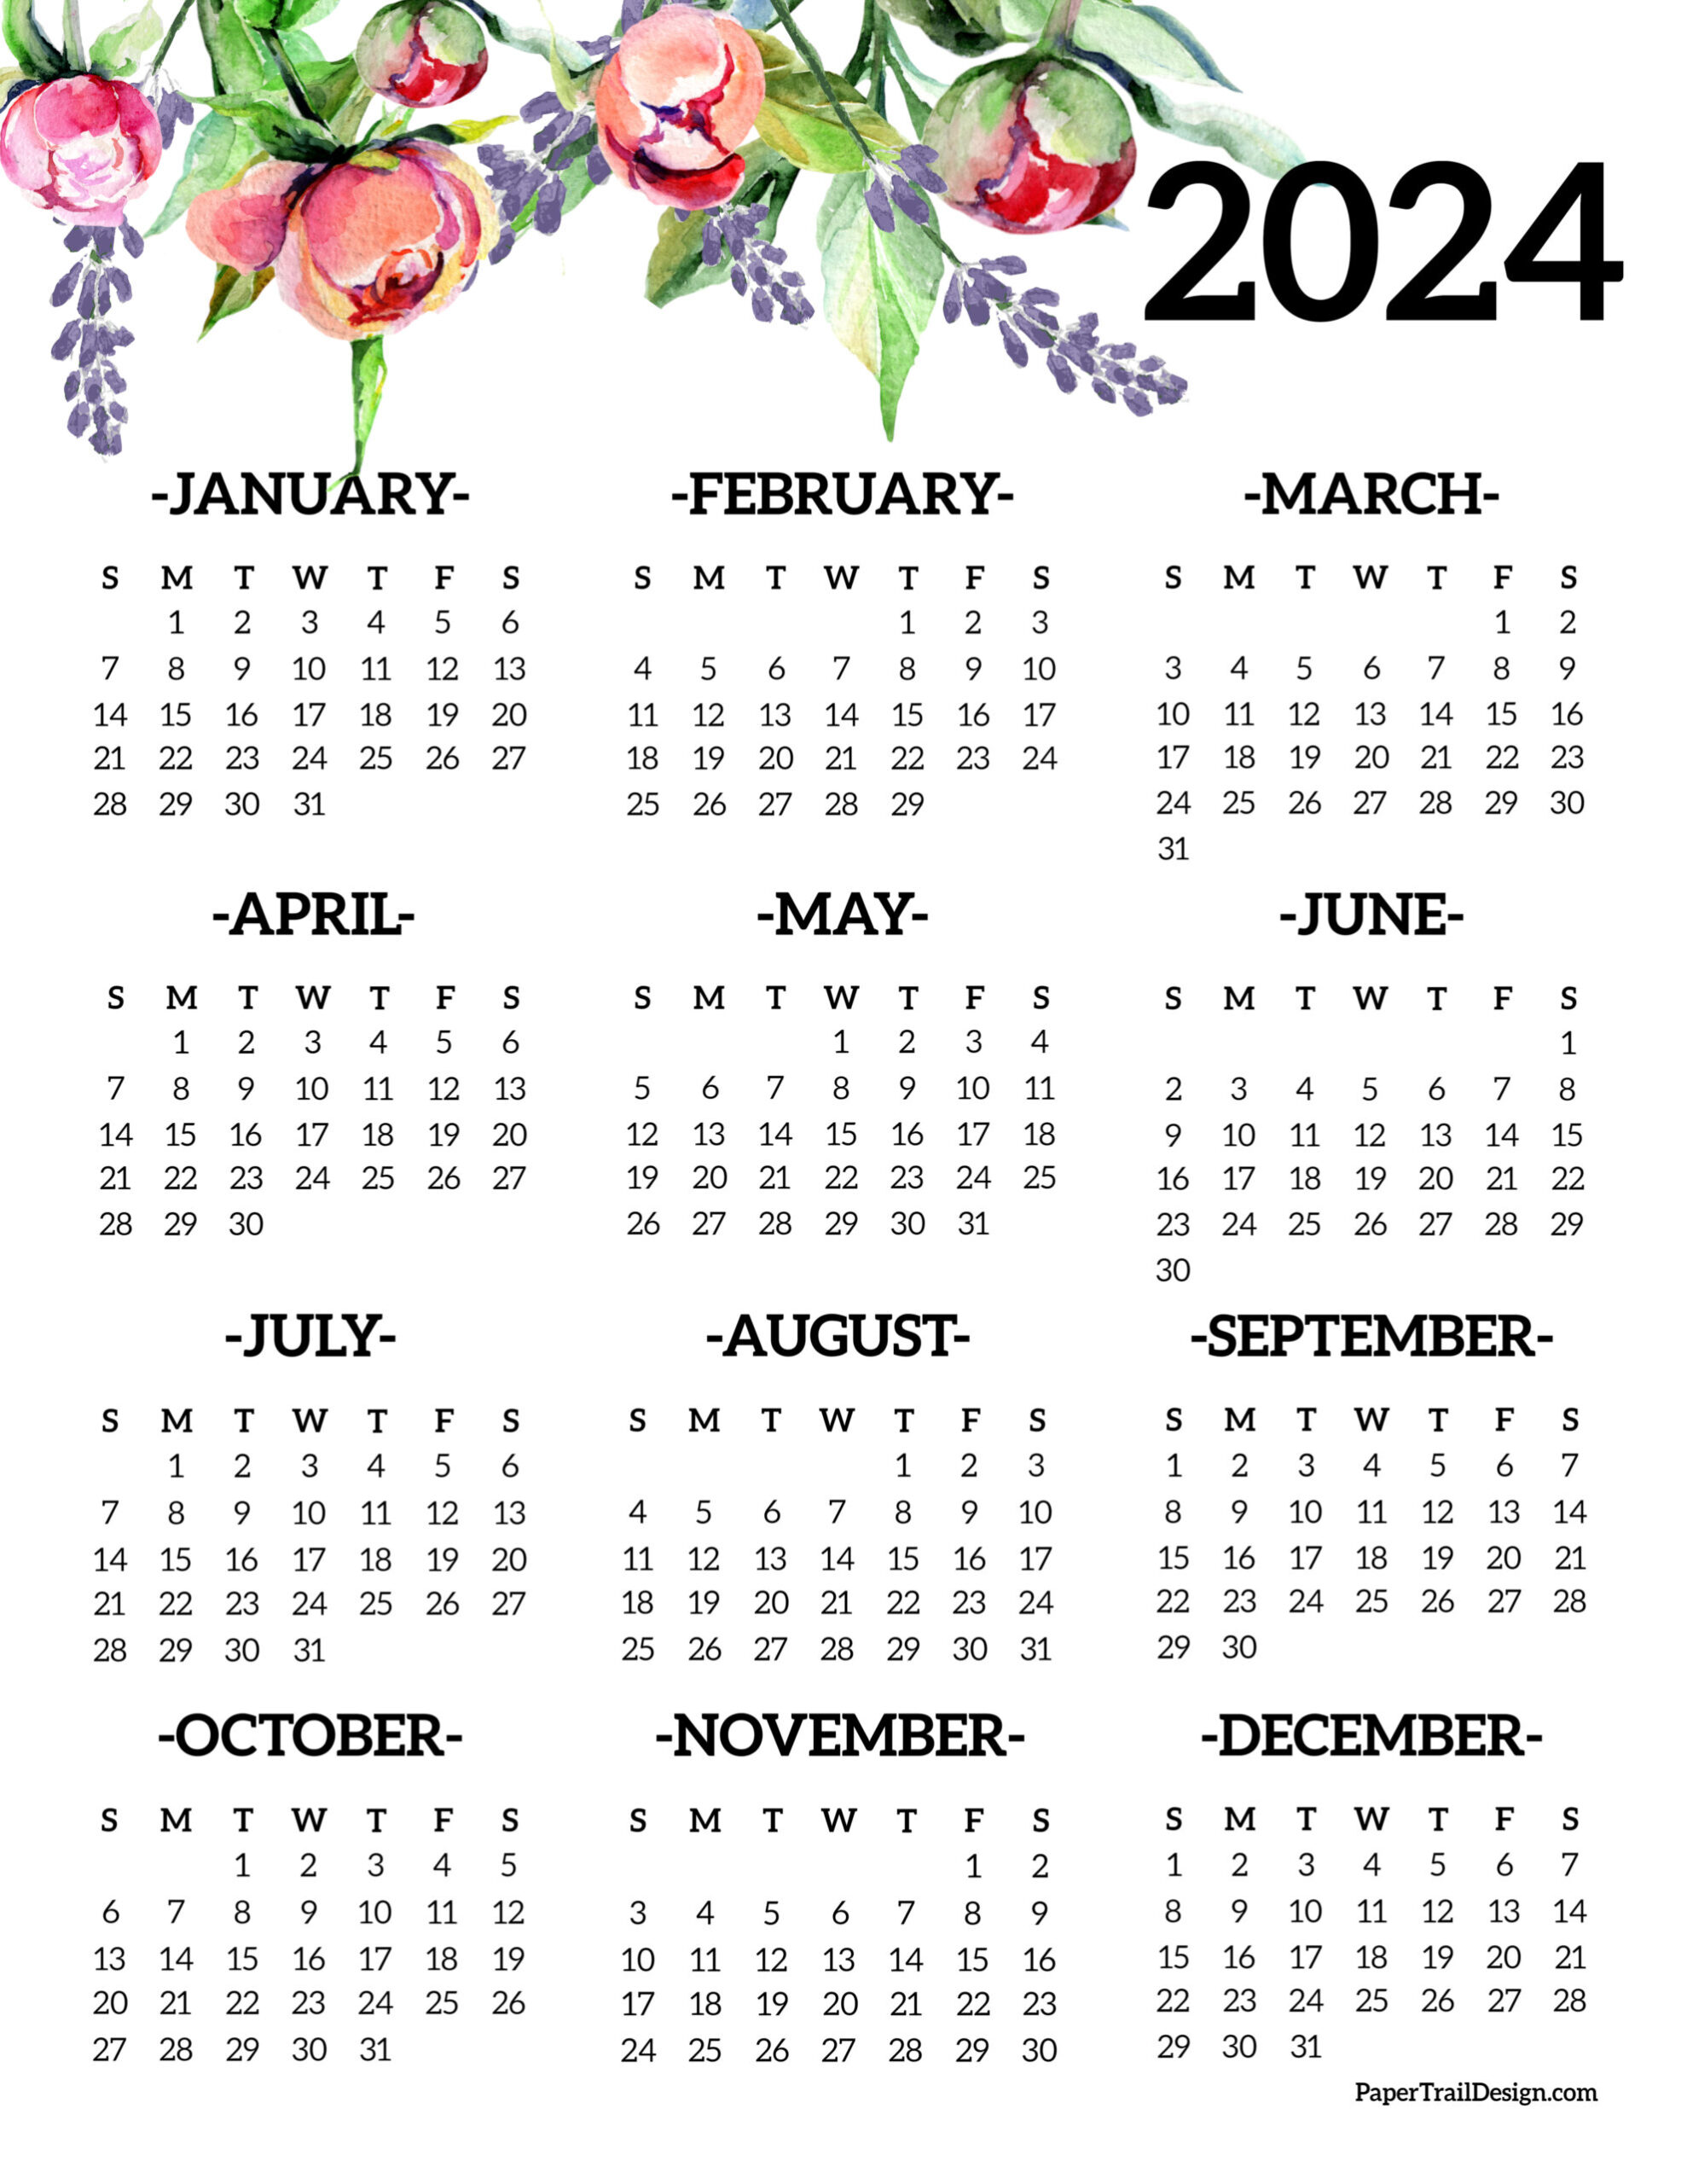 Calendar 2024 Printable One Page - Paper Trail Design for One Page 2024 Printable Calendar